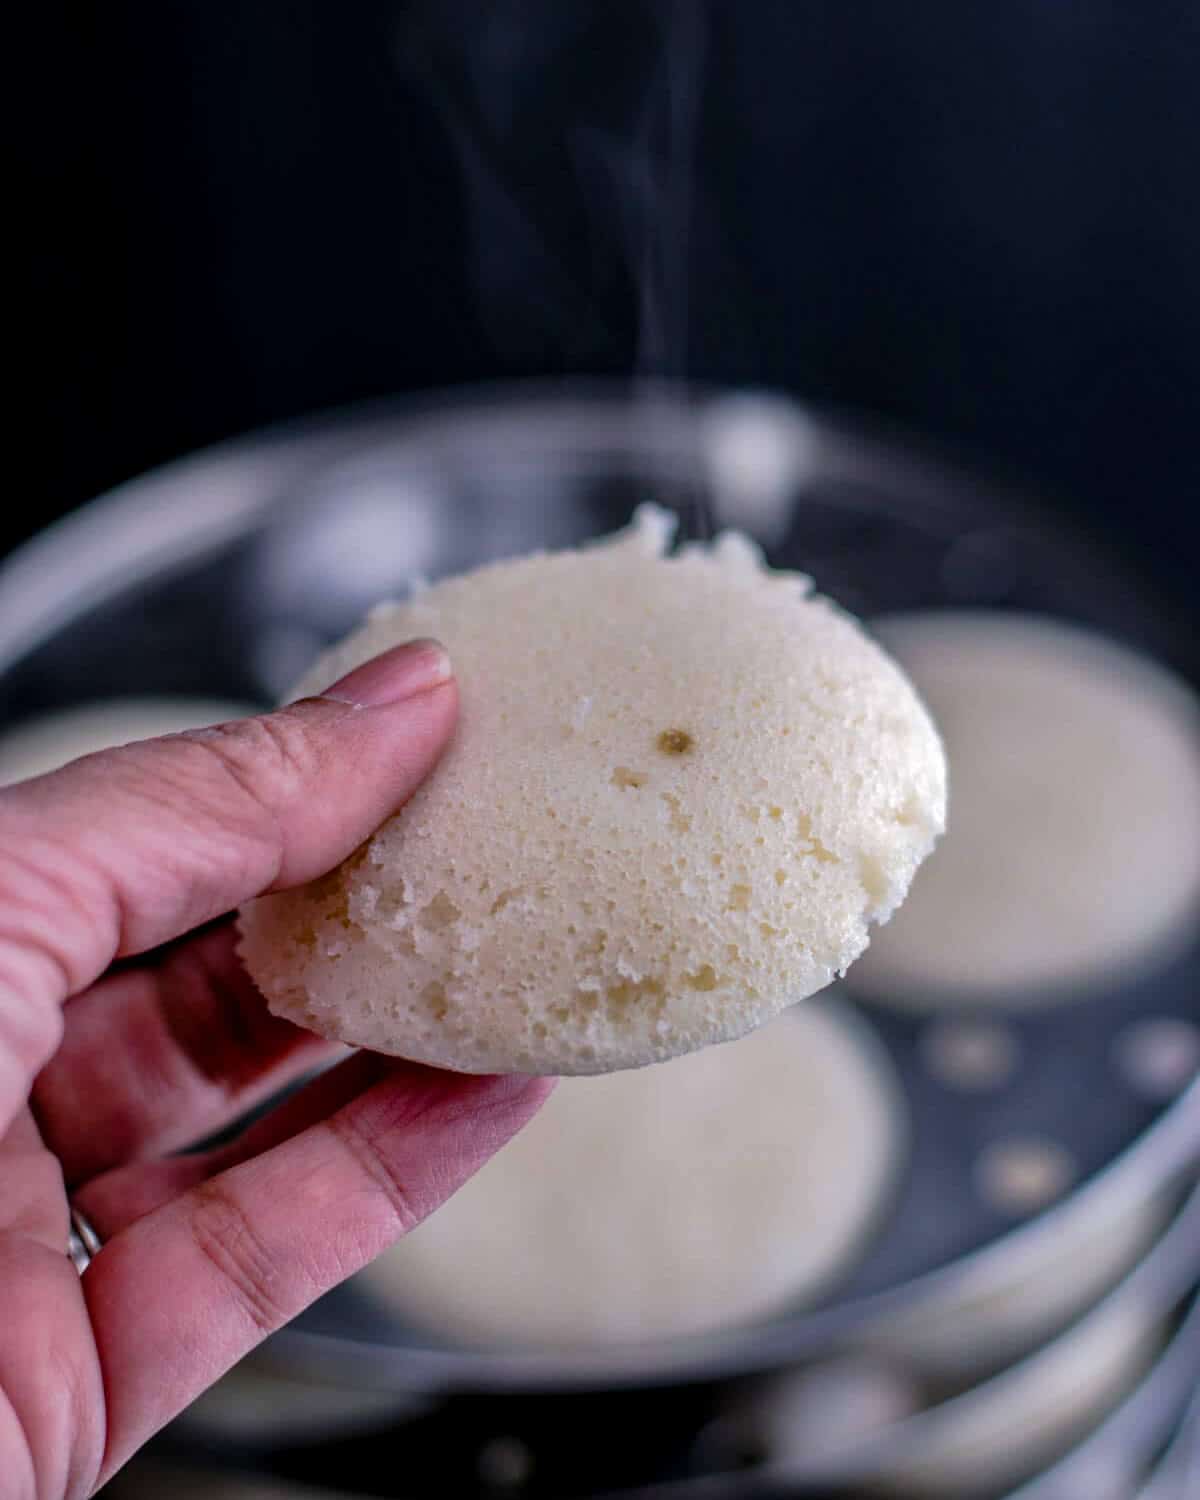 A hand holding a steaming hot idli